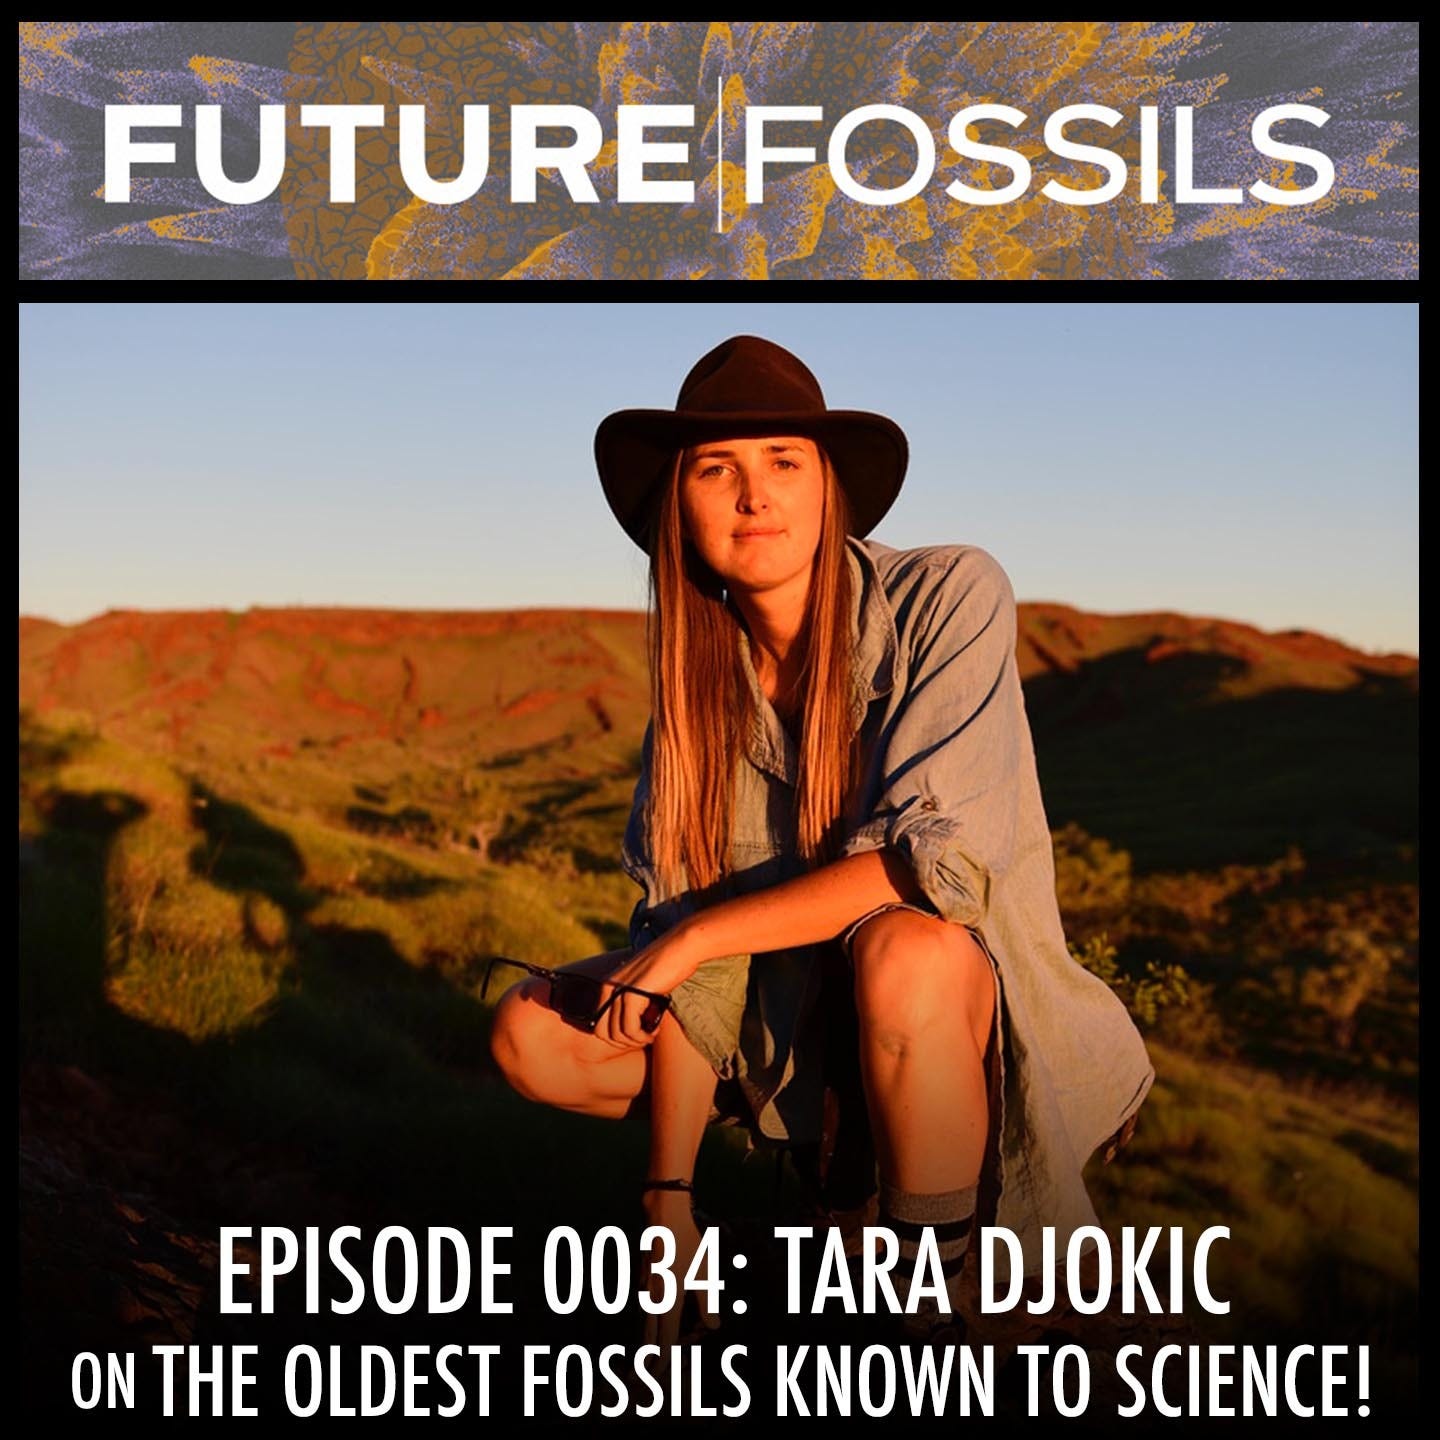 34 - Tara Djokic (The Oldest Fossils Known To Science!)